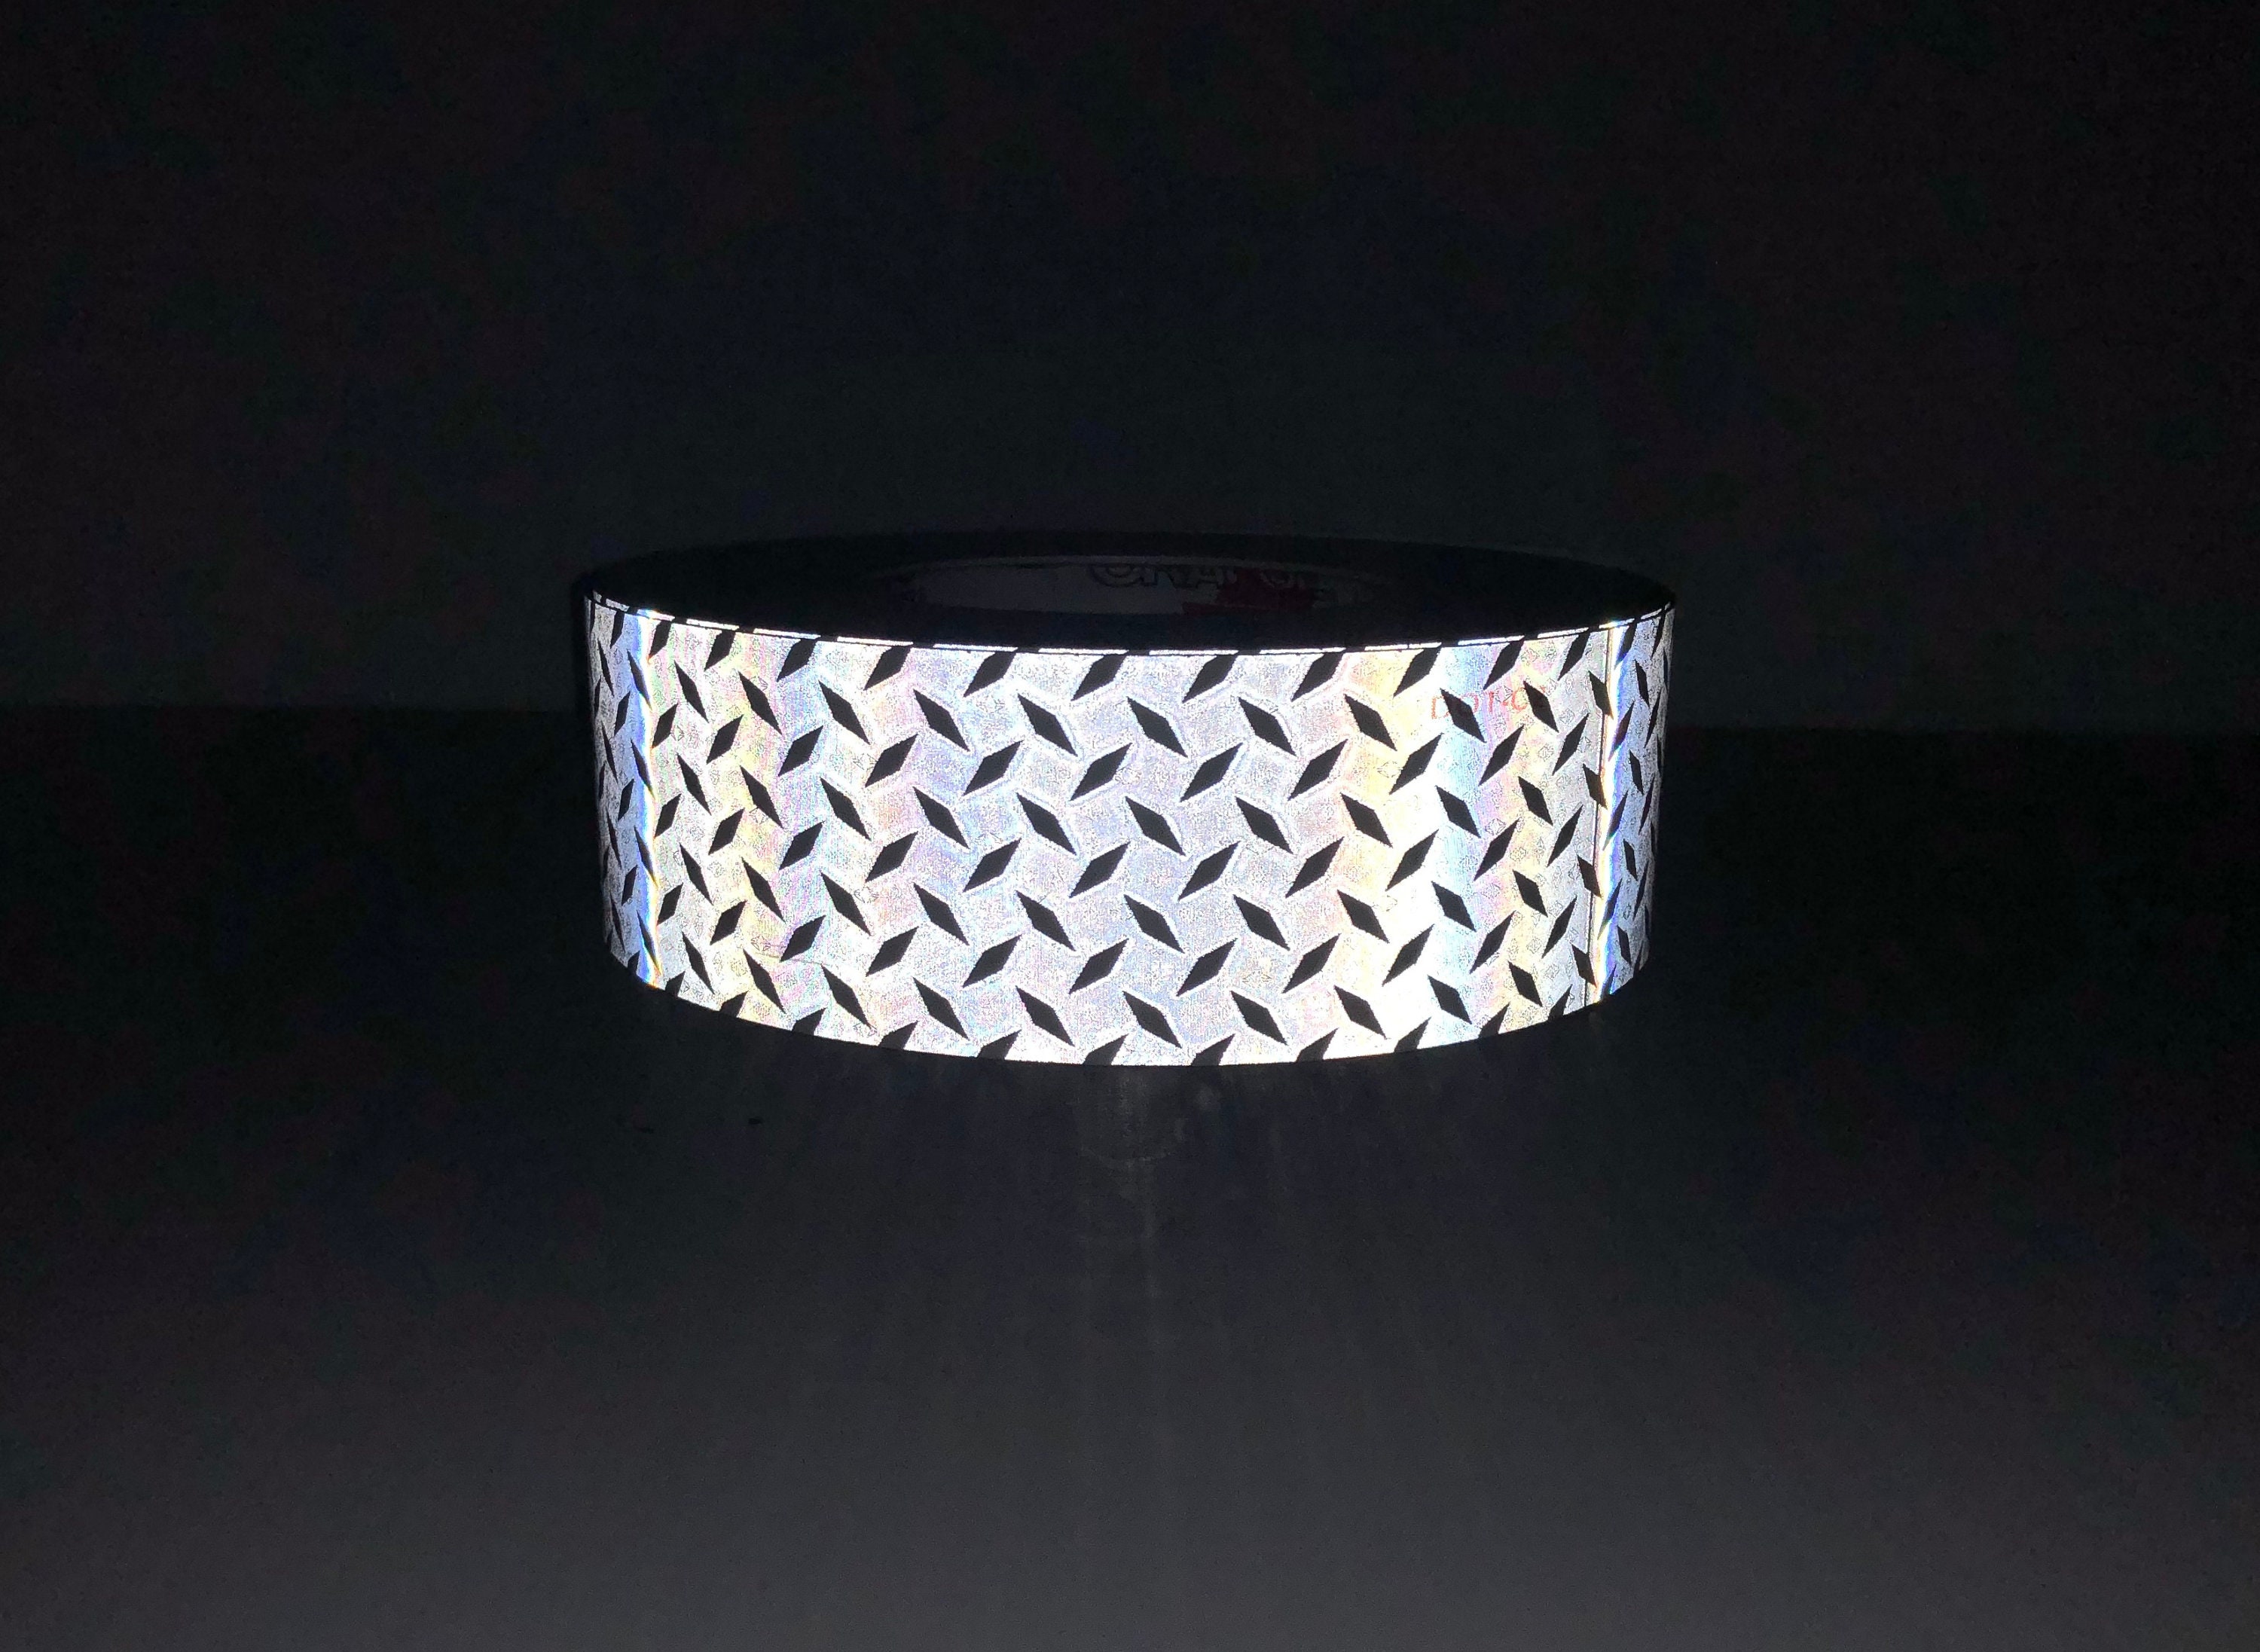 Oralite Conspicuity Tape 2 inch x 150' - Diamond Plate Pattern